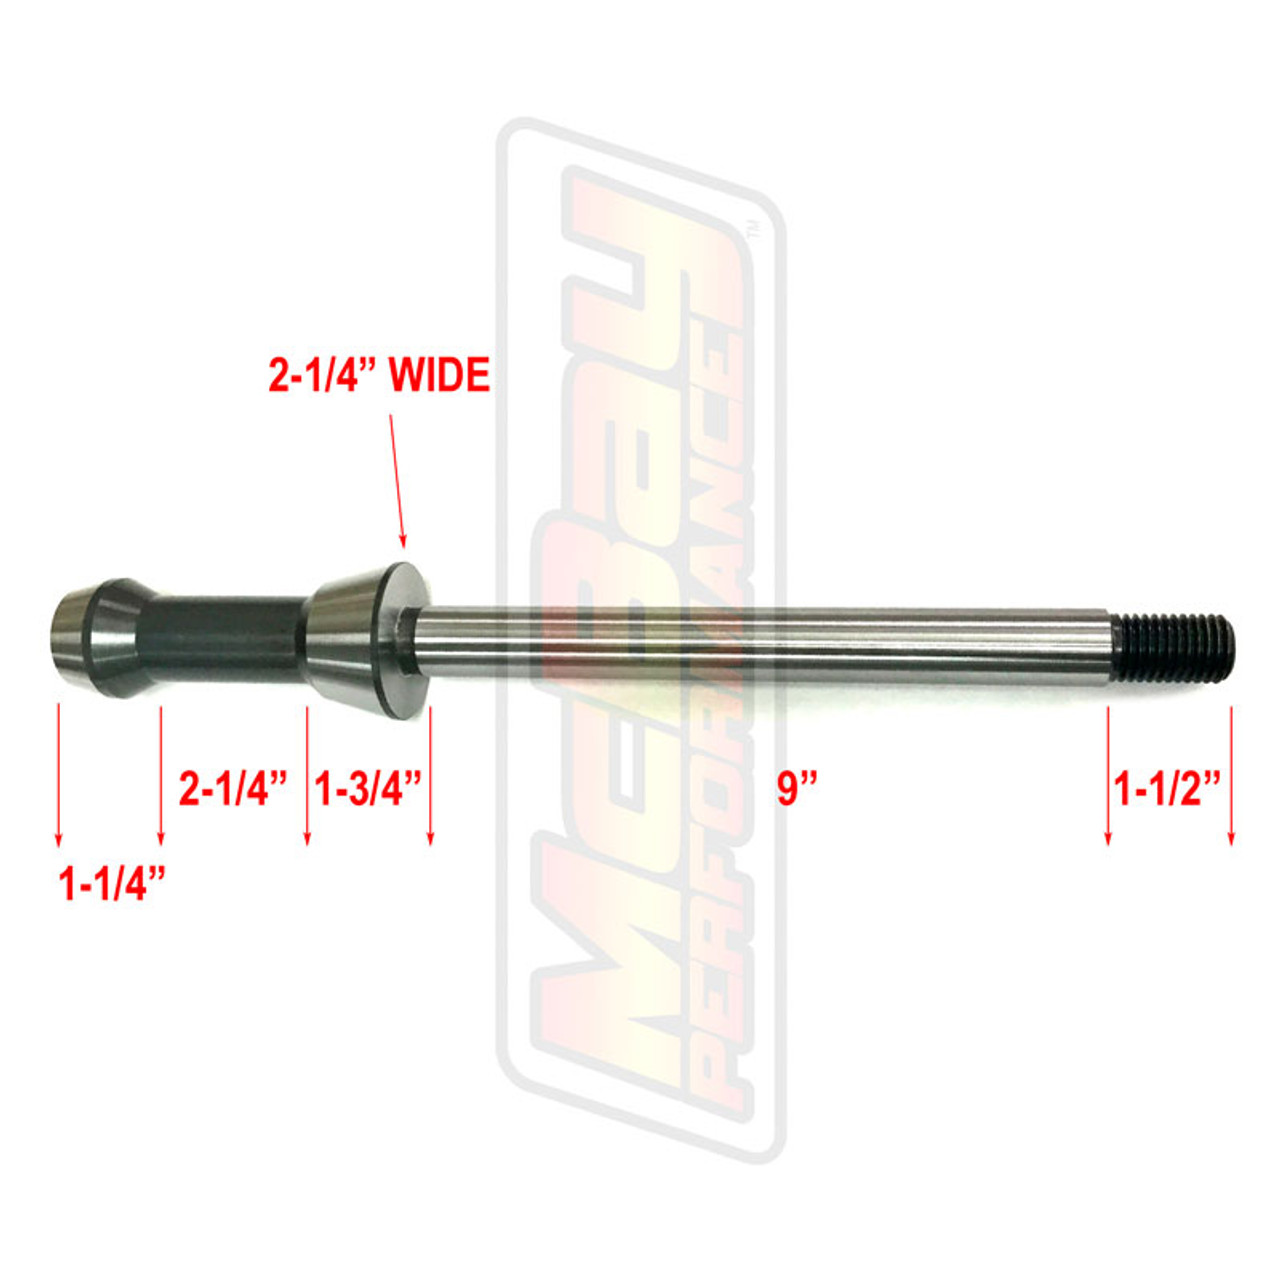 7101 - Ammco Brake Lathe 1" Arbor Replacement Shaft Dimensions MT-RSR | McBay Performance